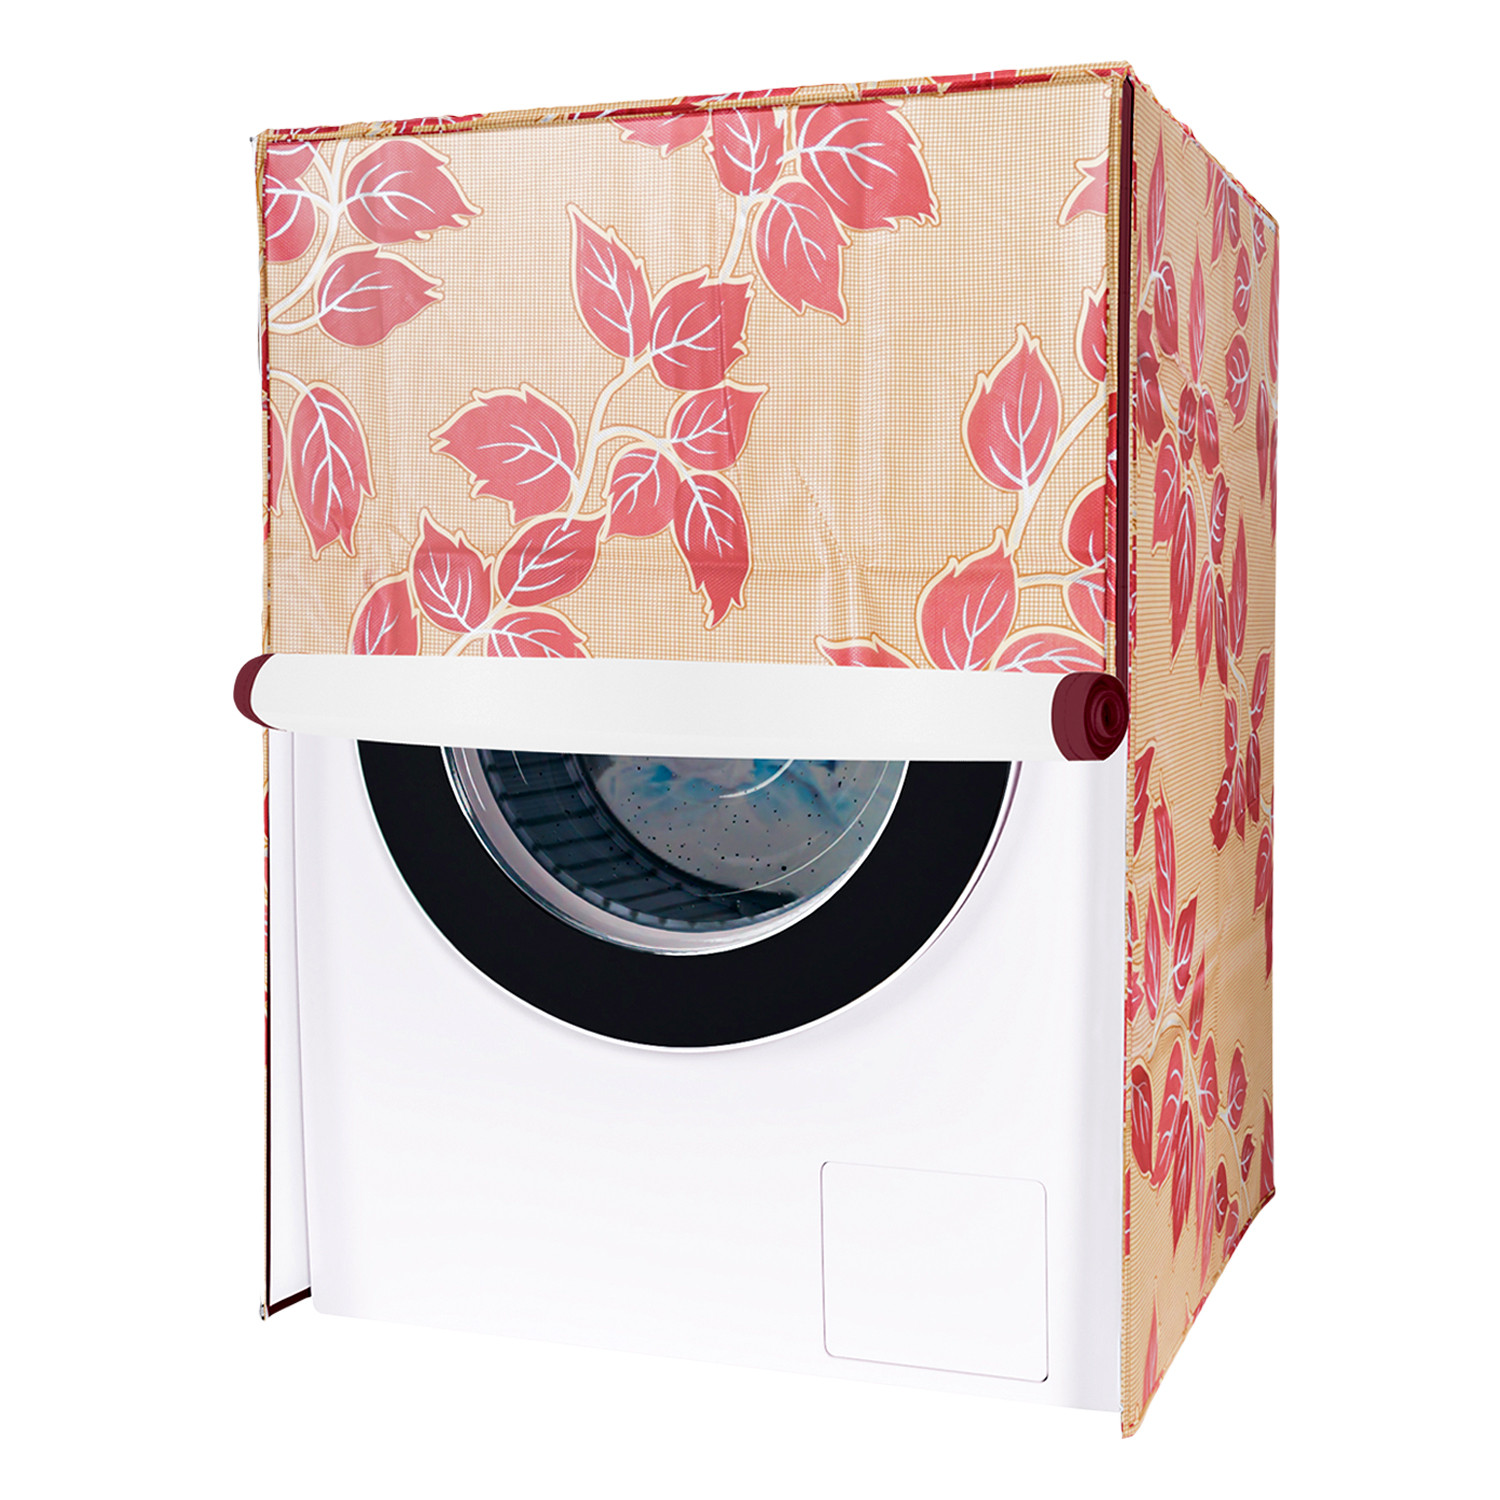 Kuber Industries Washing Machine Cover | Leaf Print Washing Machine Cover | PVC | Front Load Washing Machine Cover | Red